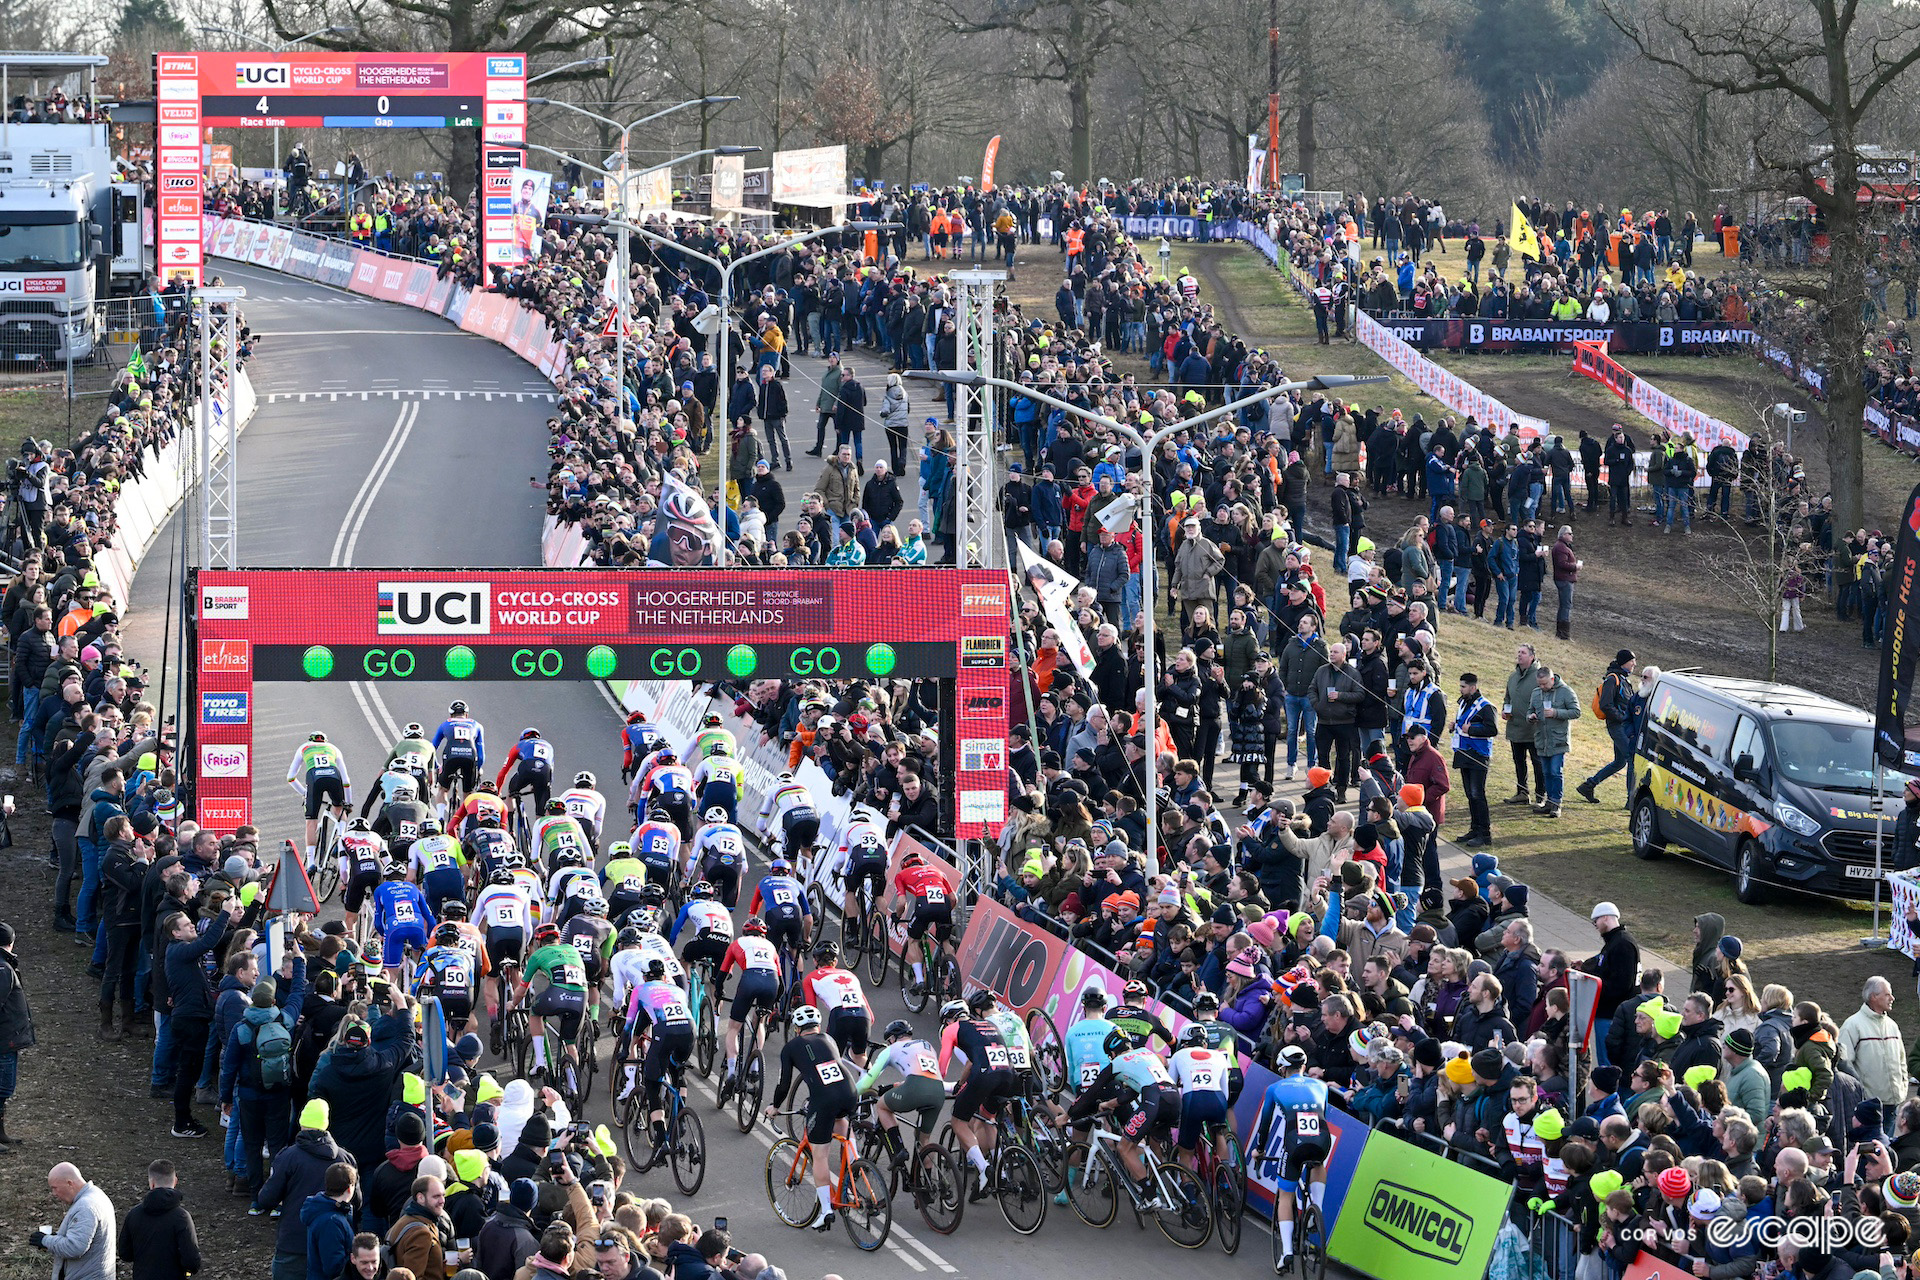 A wide view of the elite men's start at CX World Cup Hoogerheide, showing the moment of a crash deep in the pack as the race got underway.